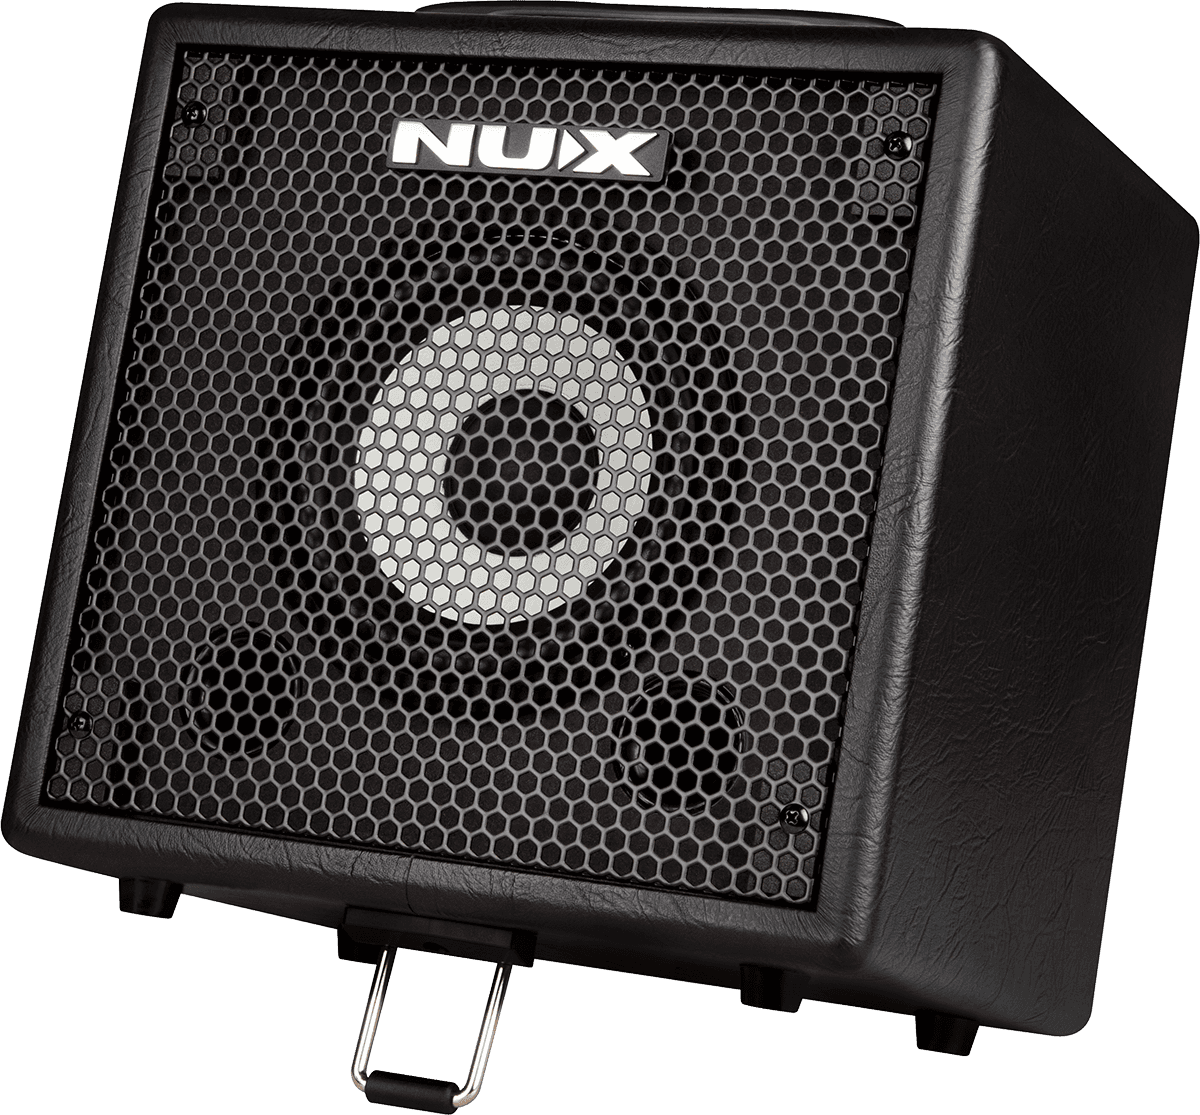 NUX Mighty Bass 50 8